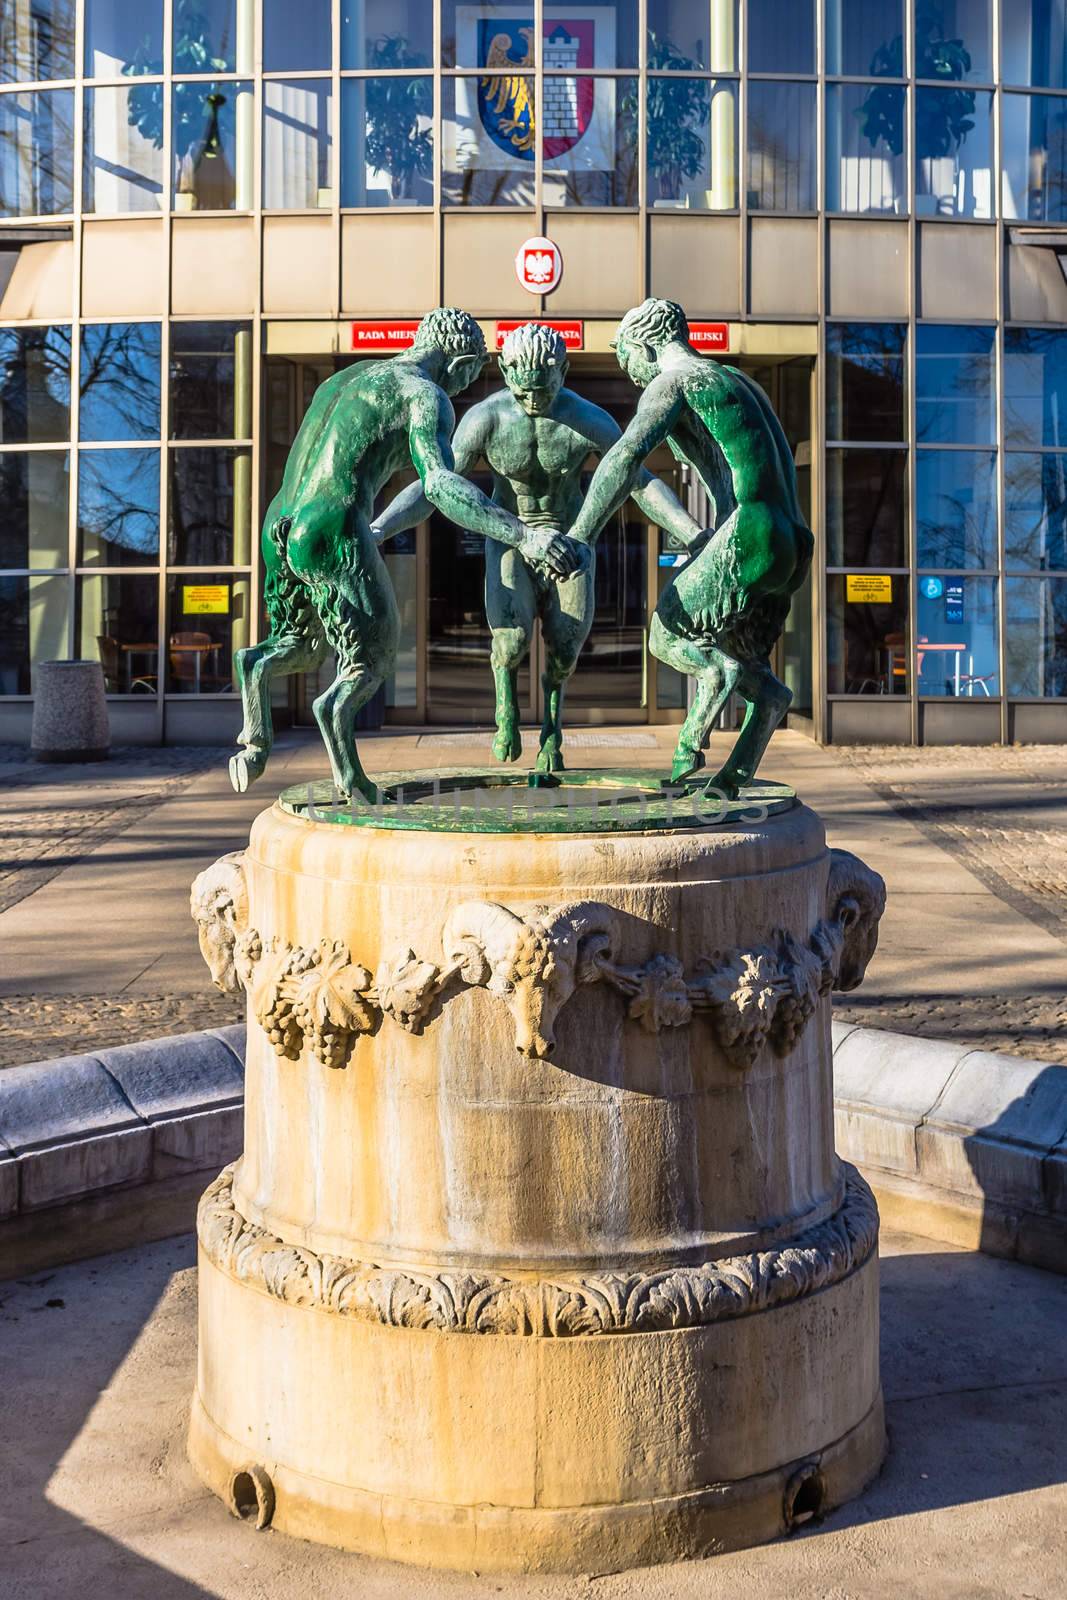 Sculpture in front of the city hall in Gliwice. Locals say fauns symbolize mayors of Bytom, Gliwice and Zabrze who could not reach an agreement on planned merger before WWII.